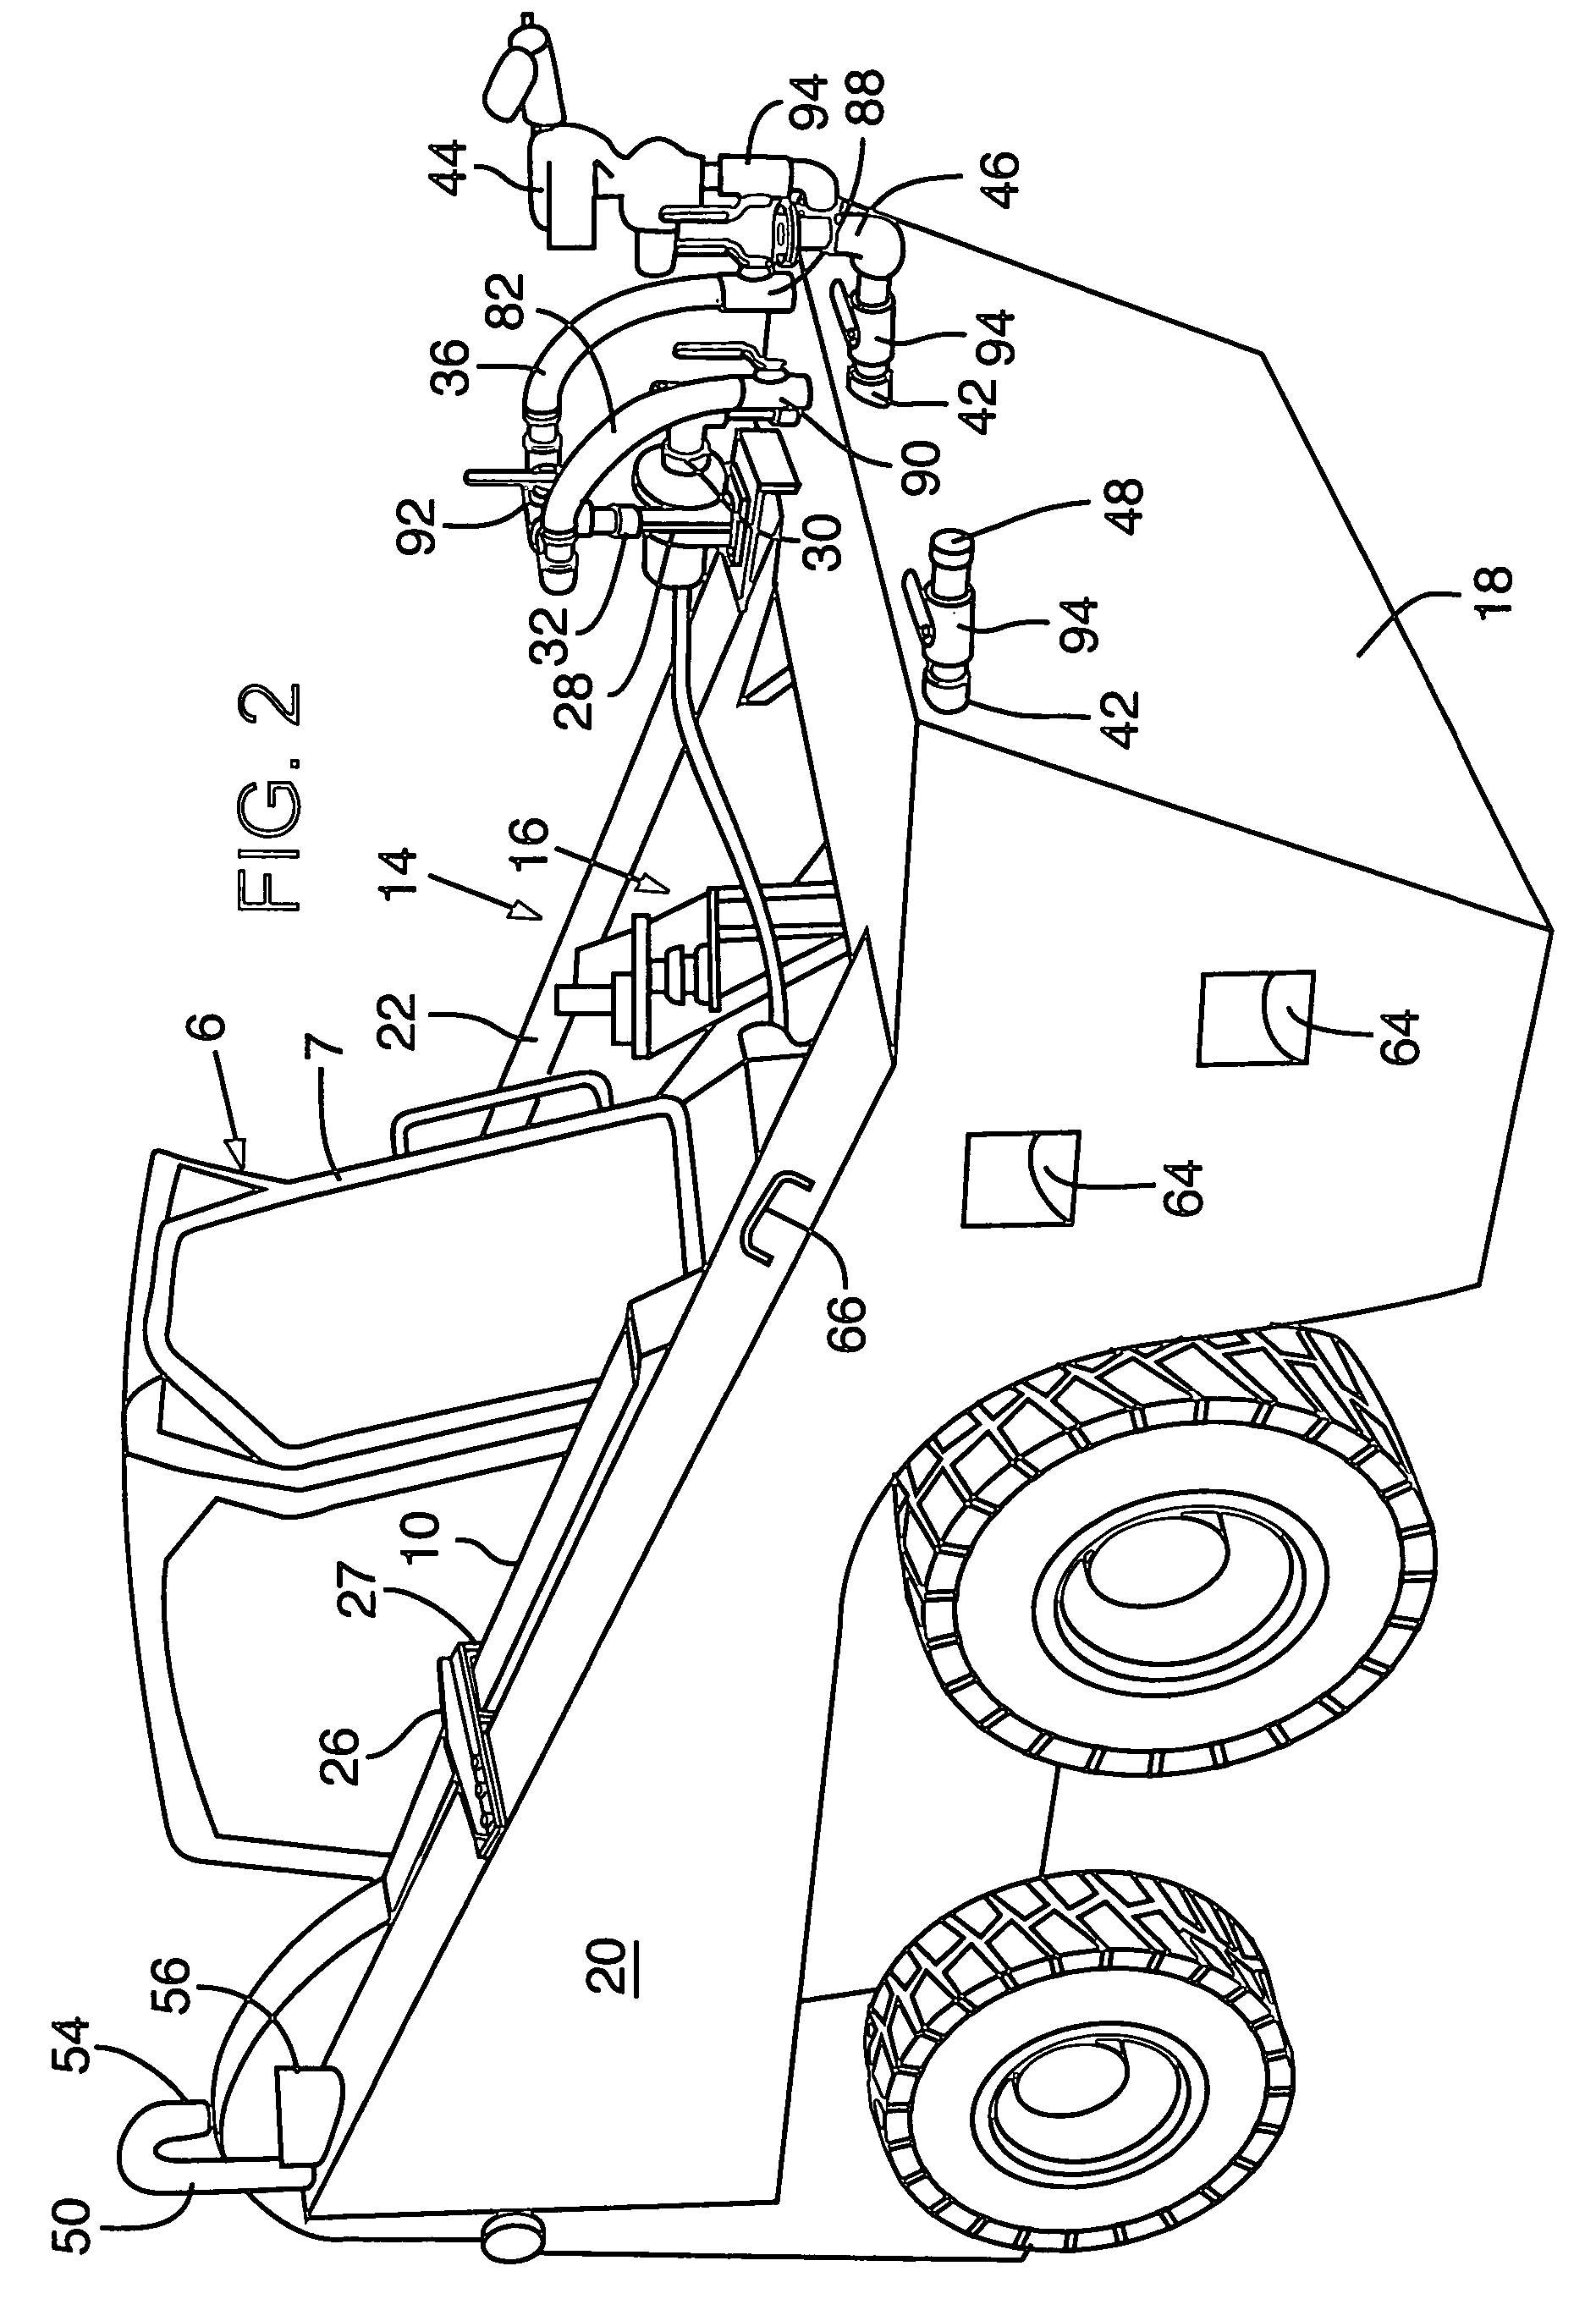 Portable fluid-transporting system